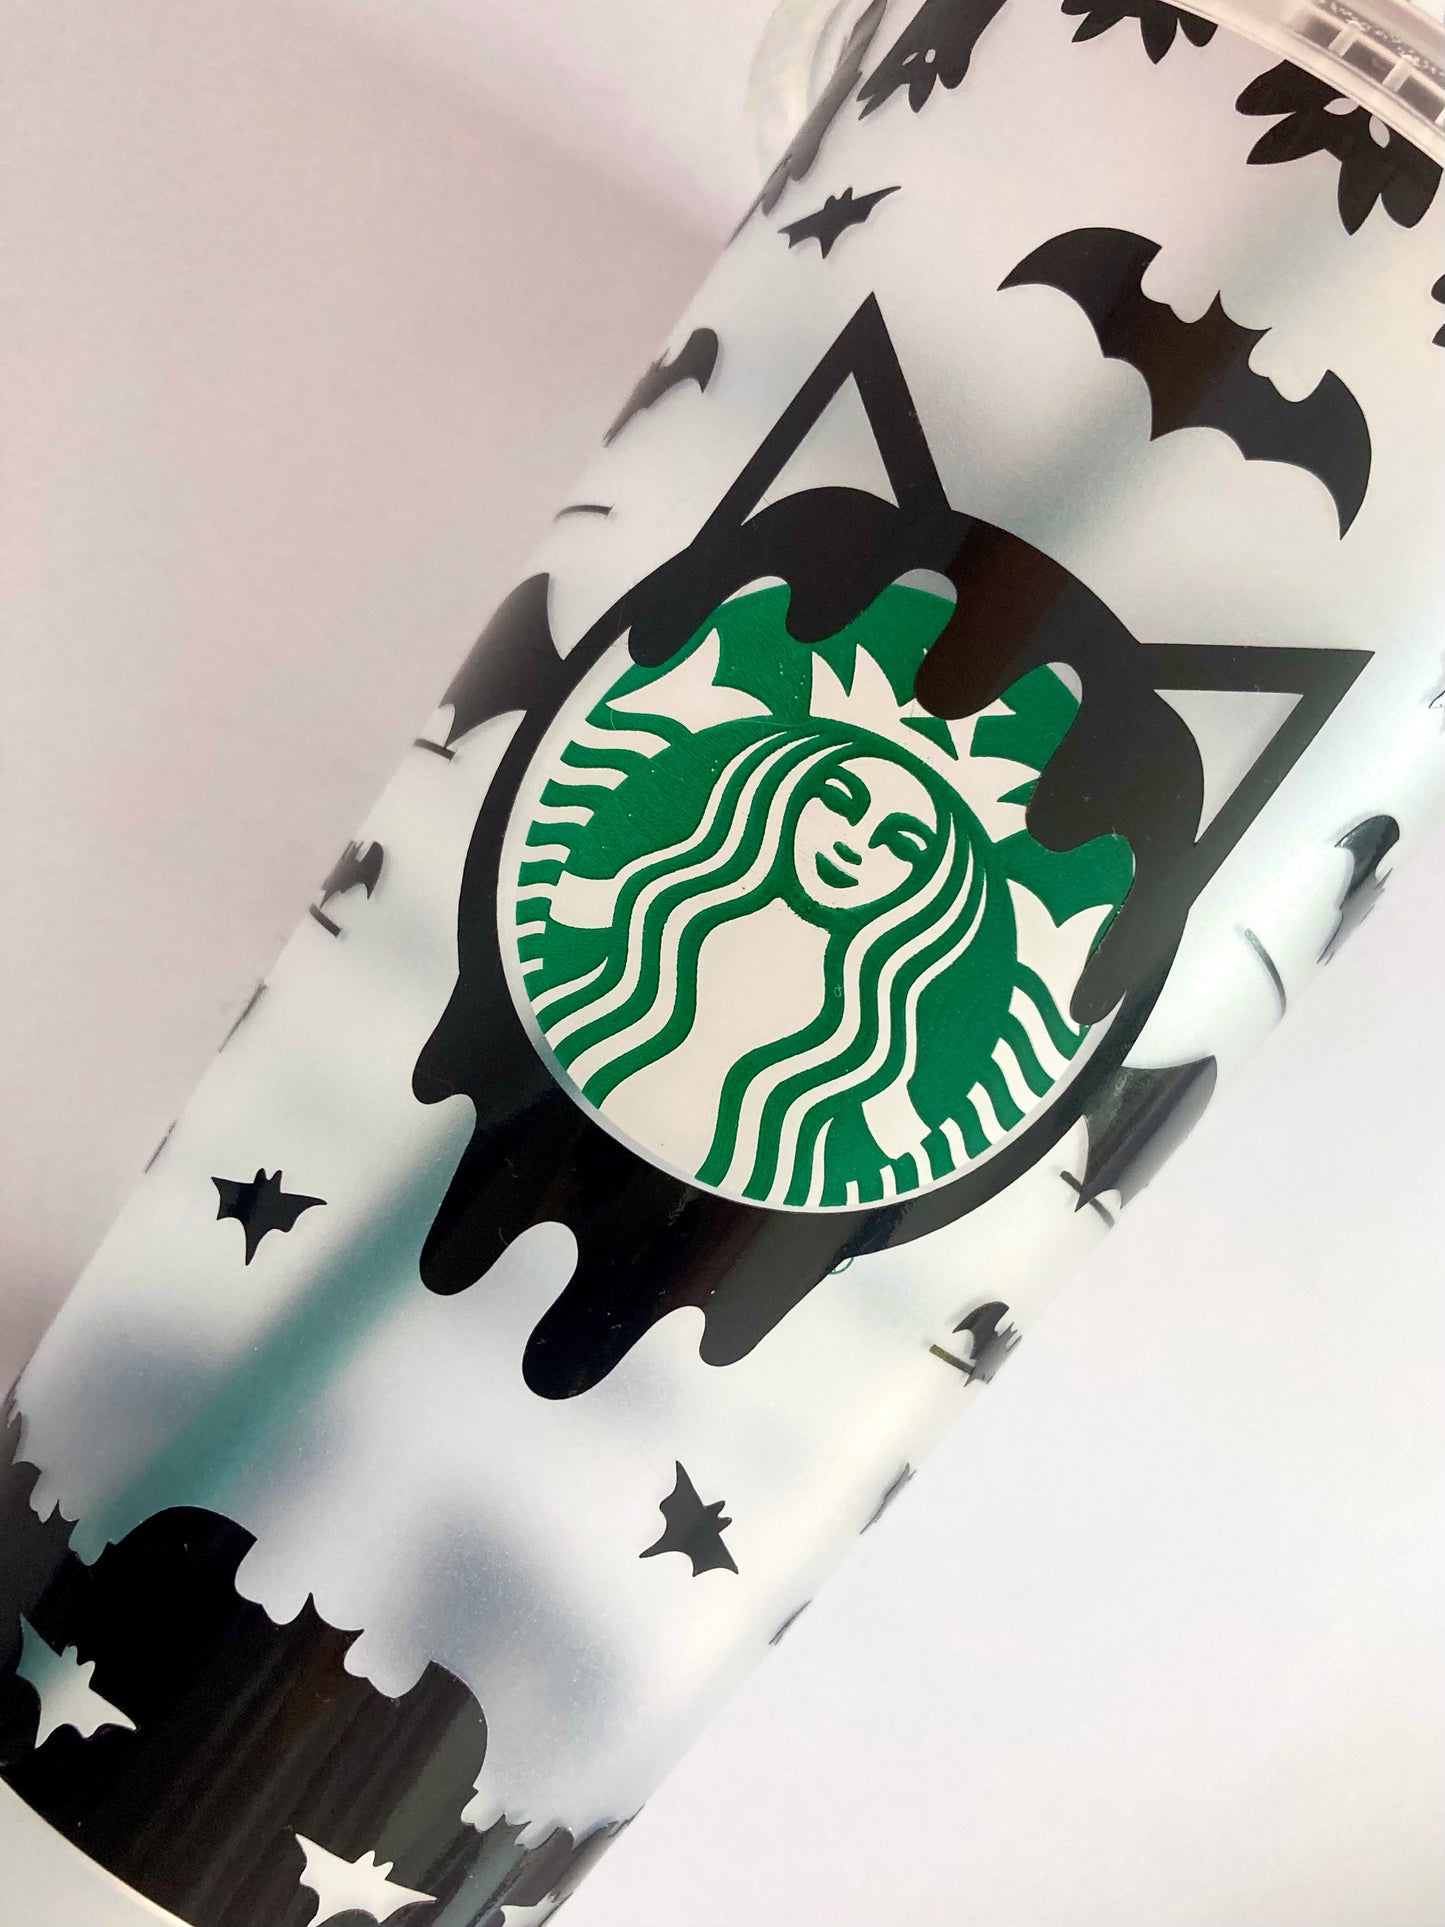 Starbucks custom cold cup with bats design